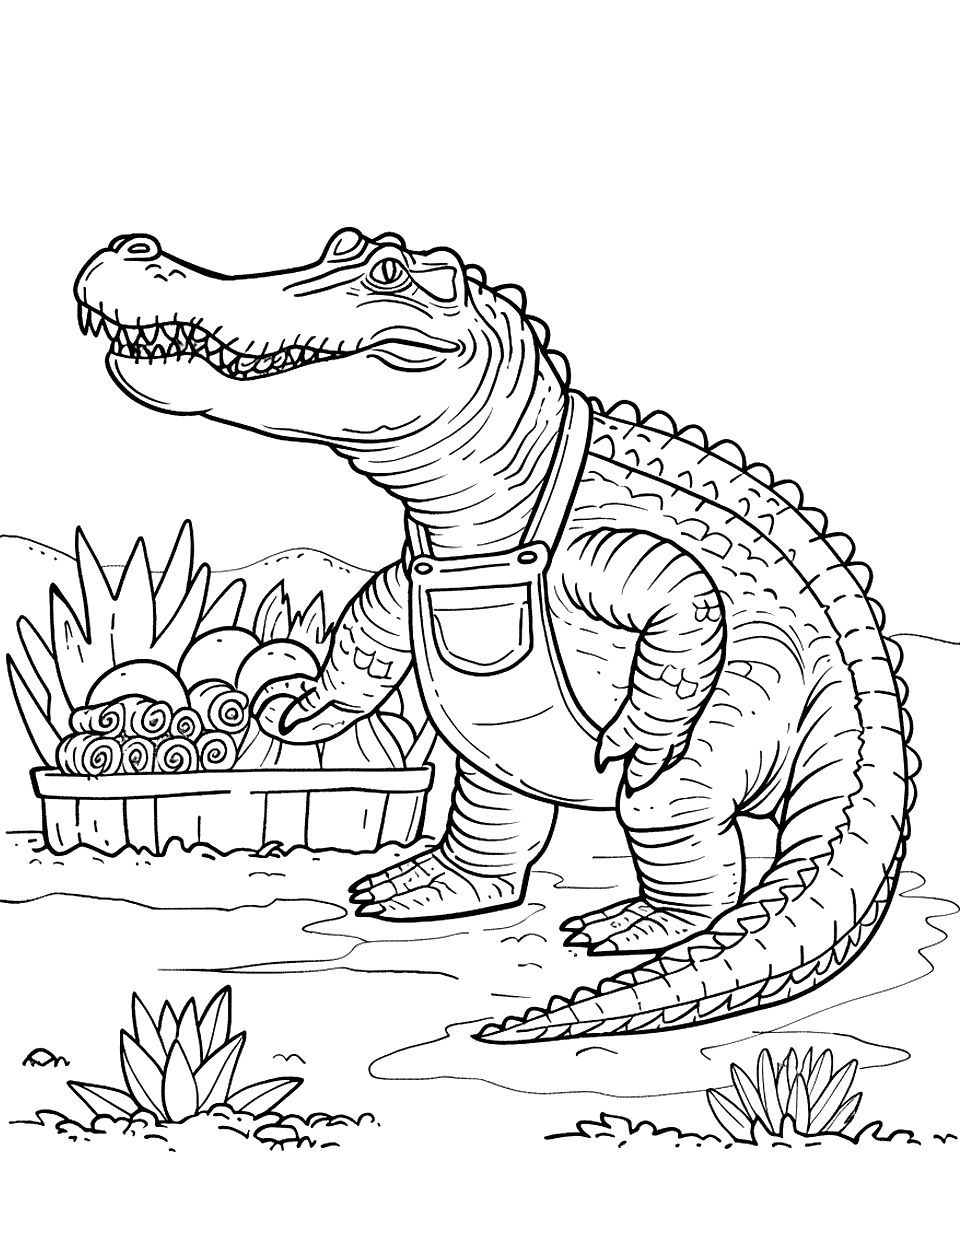 Crocodile Farmer Coloring Page - A crocodile in overalls collecting vegetable from his garden.